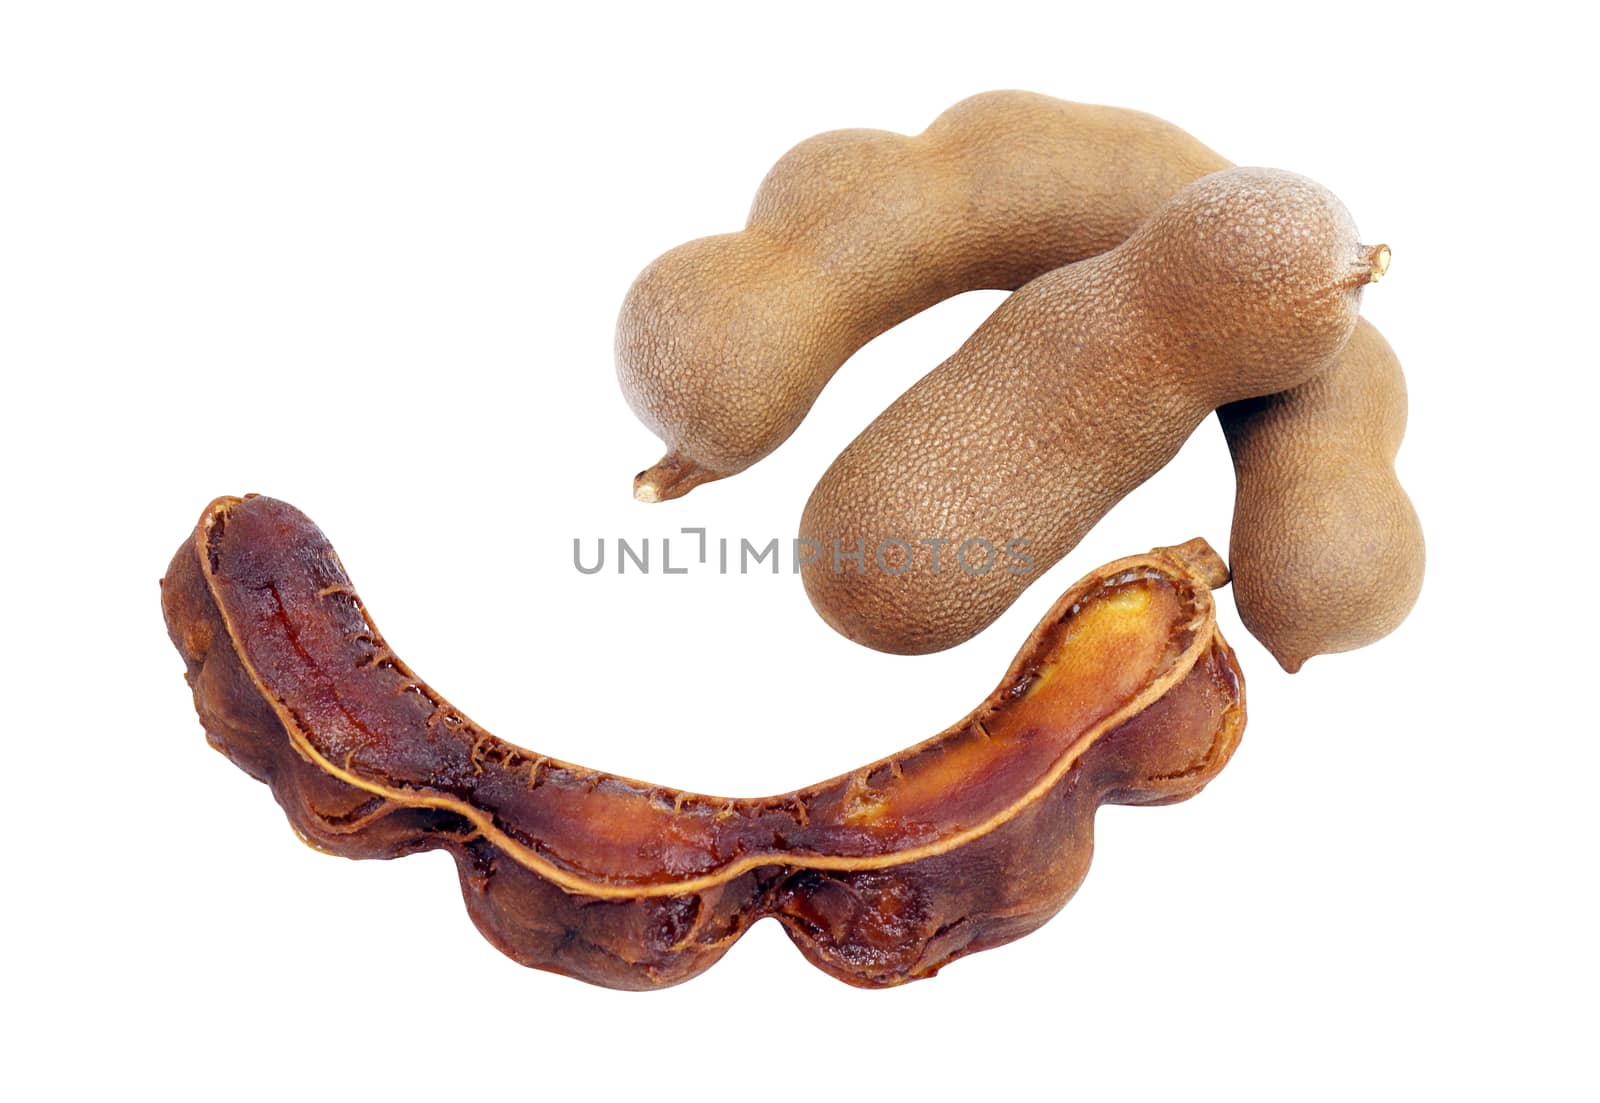 tamarind, sweet tamarind, brown tamarind, tamarind peel isolated on white background by cgdeaw